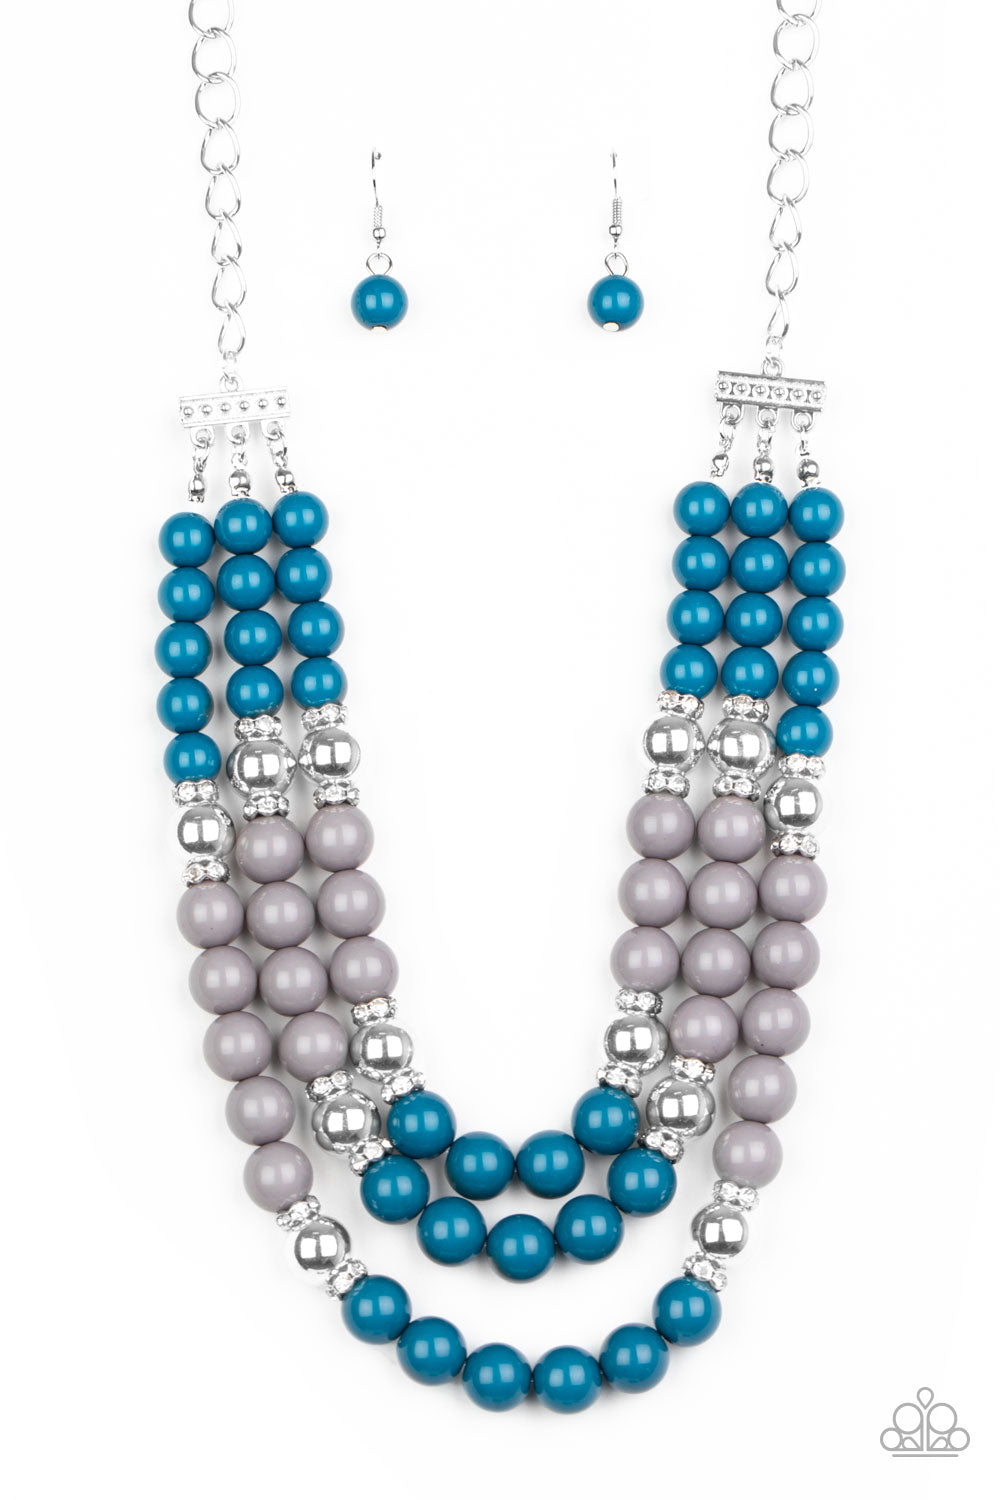 BEAD Your Own Drum Necklace - Blue